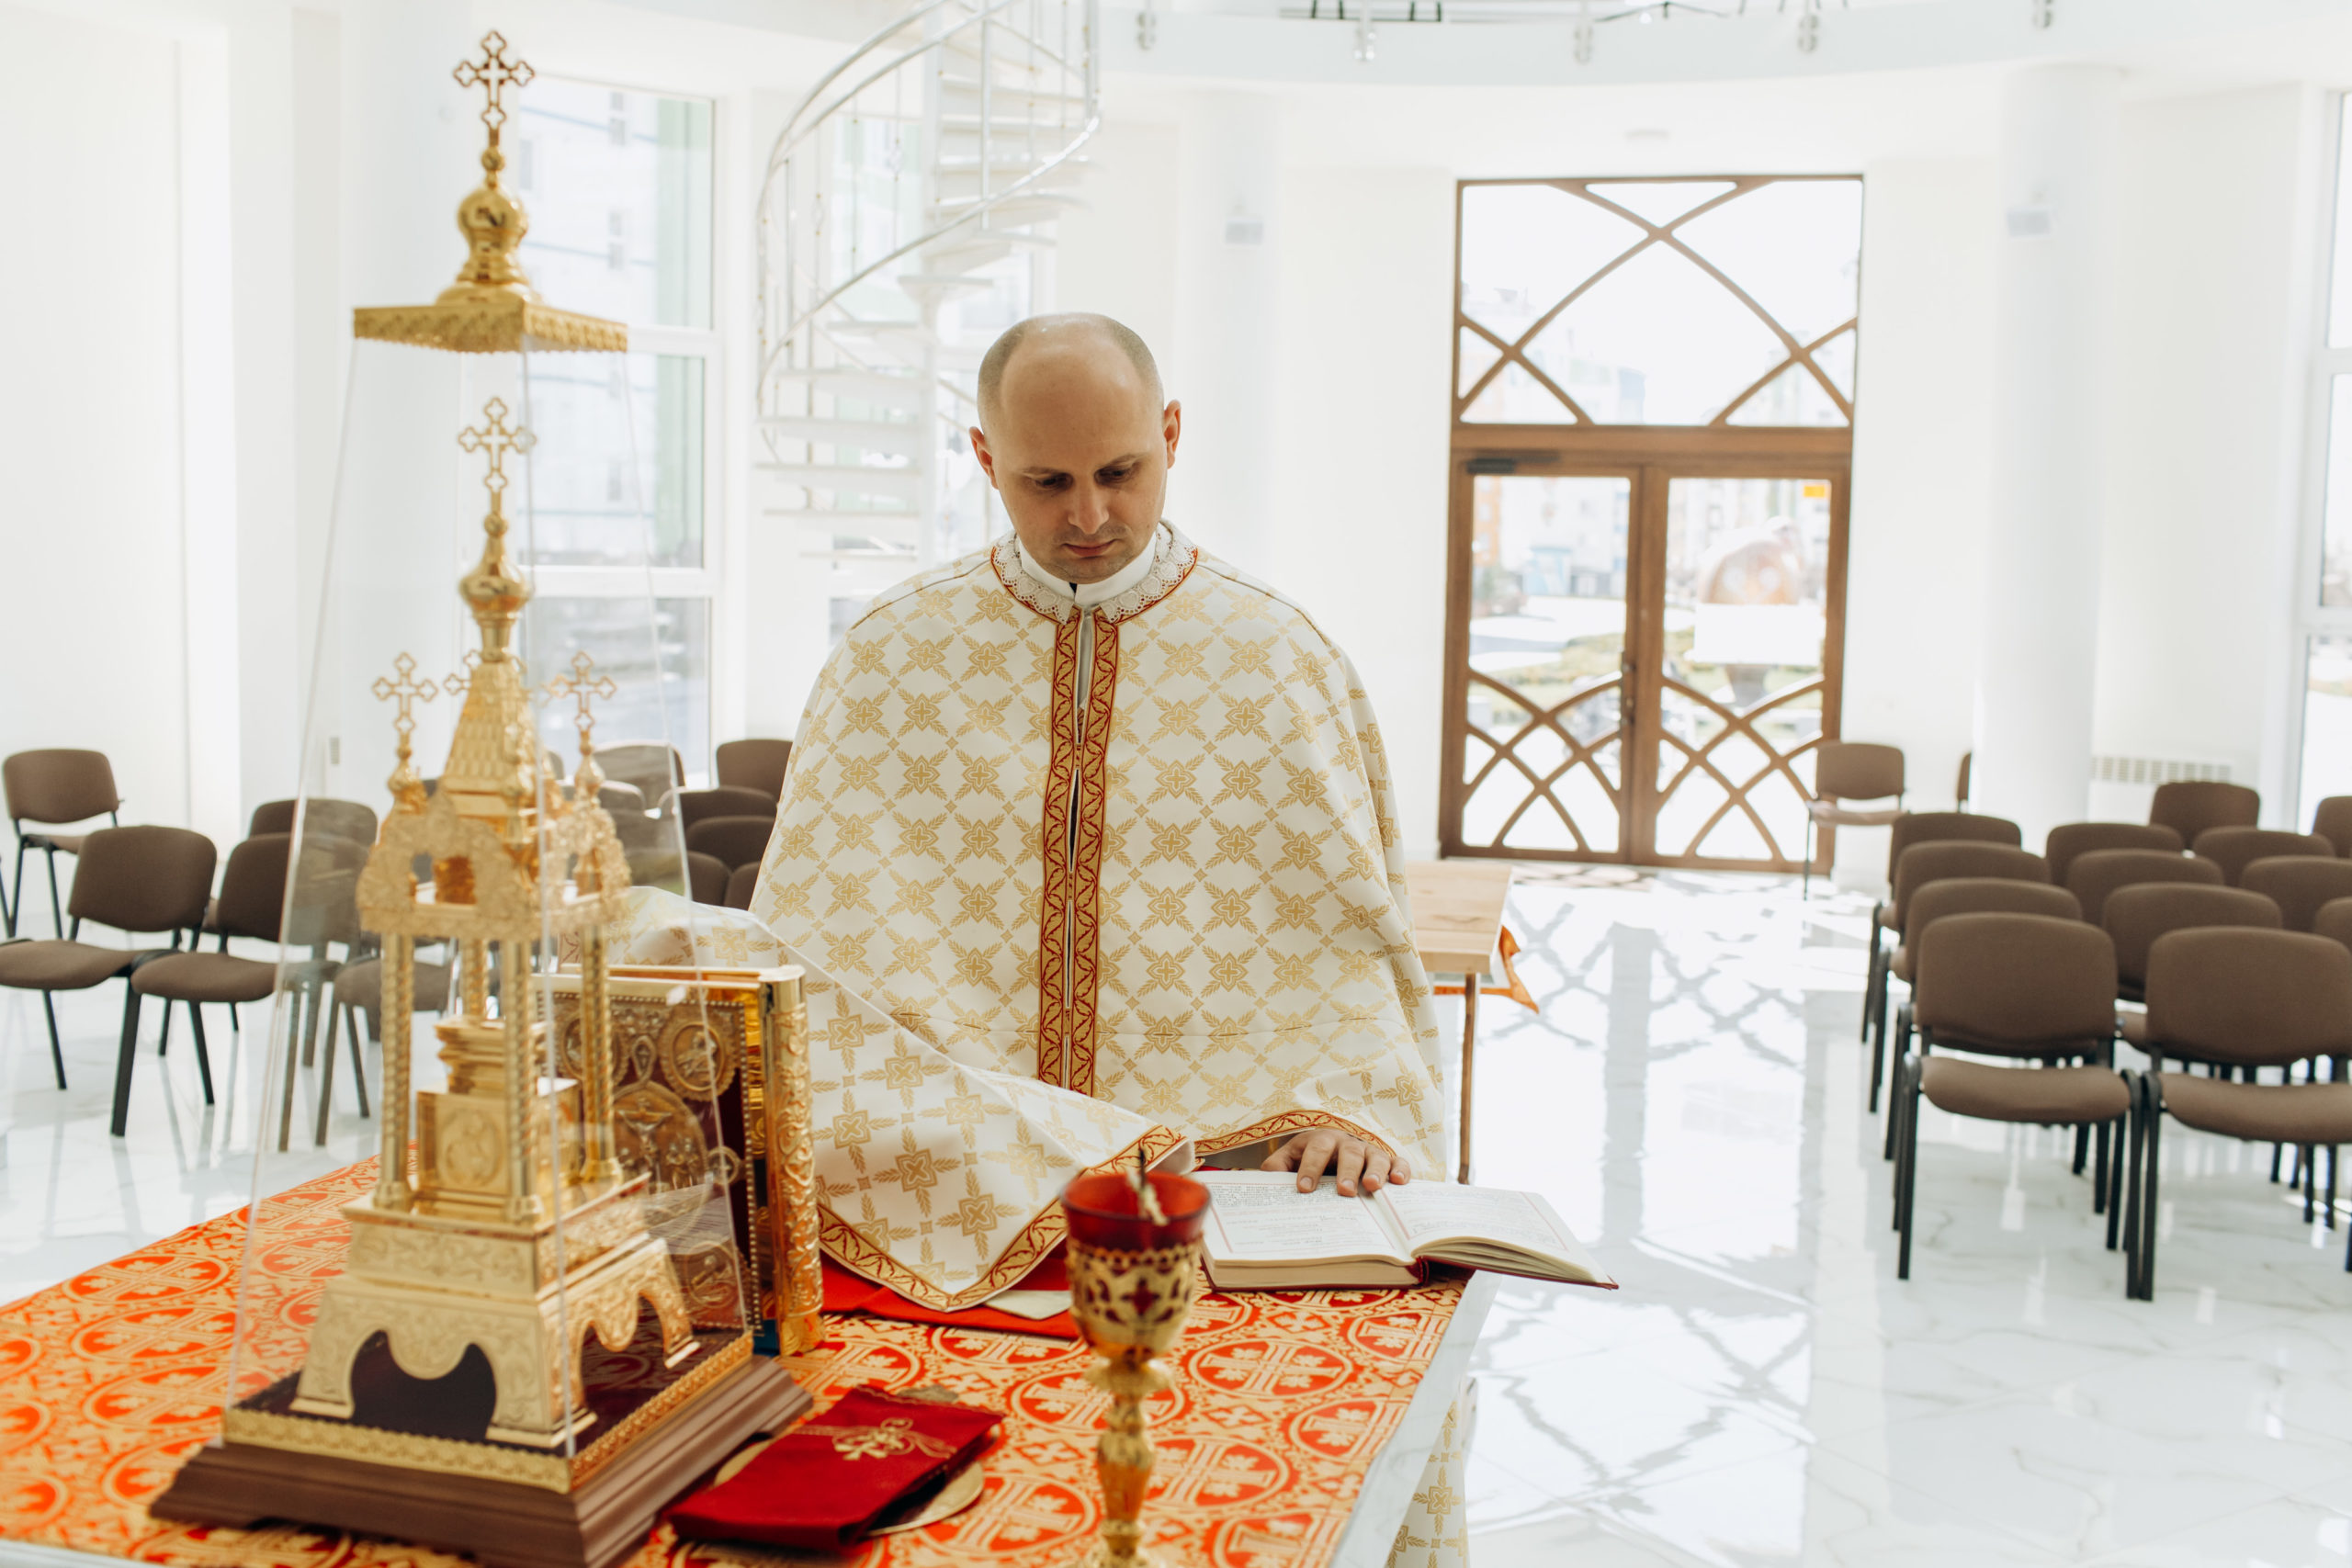 A Ukrainian Greek-Catholic priest in the Archeparchy of Ivano-Frankivsk celebrating the Divine Liturgy in an empty church because of the COVID-19 lockdown – Photo by ACN